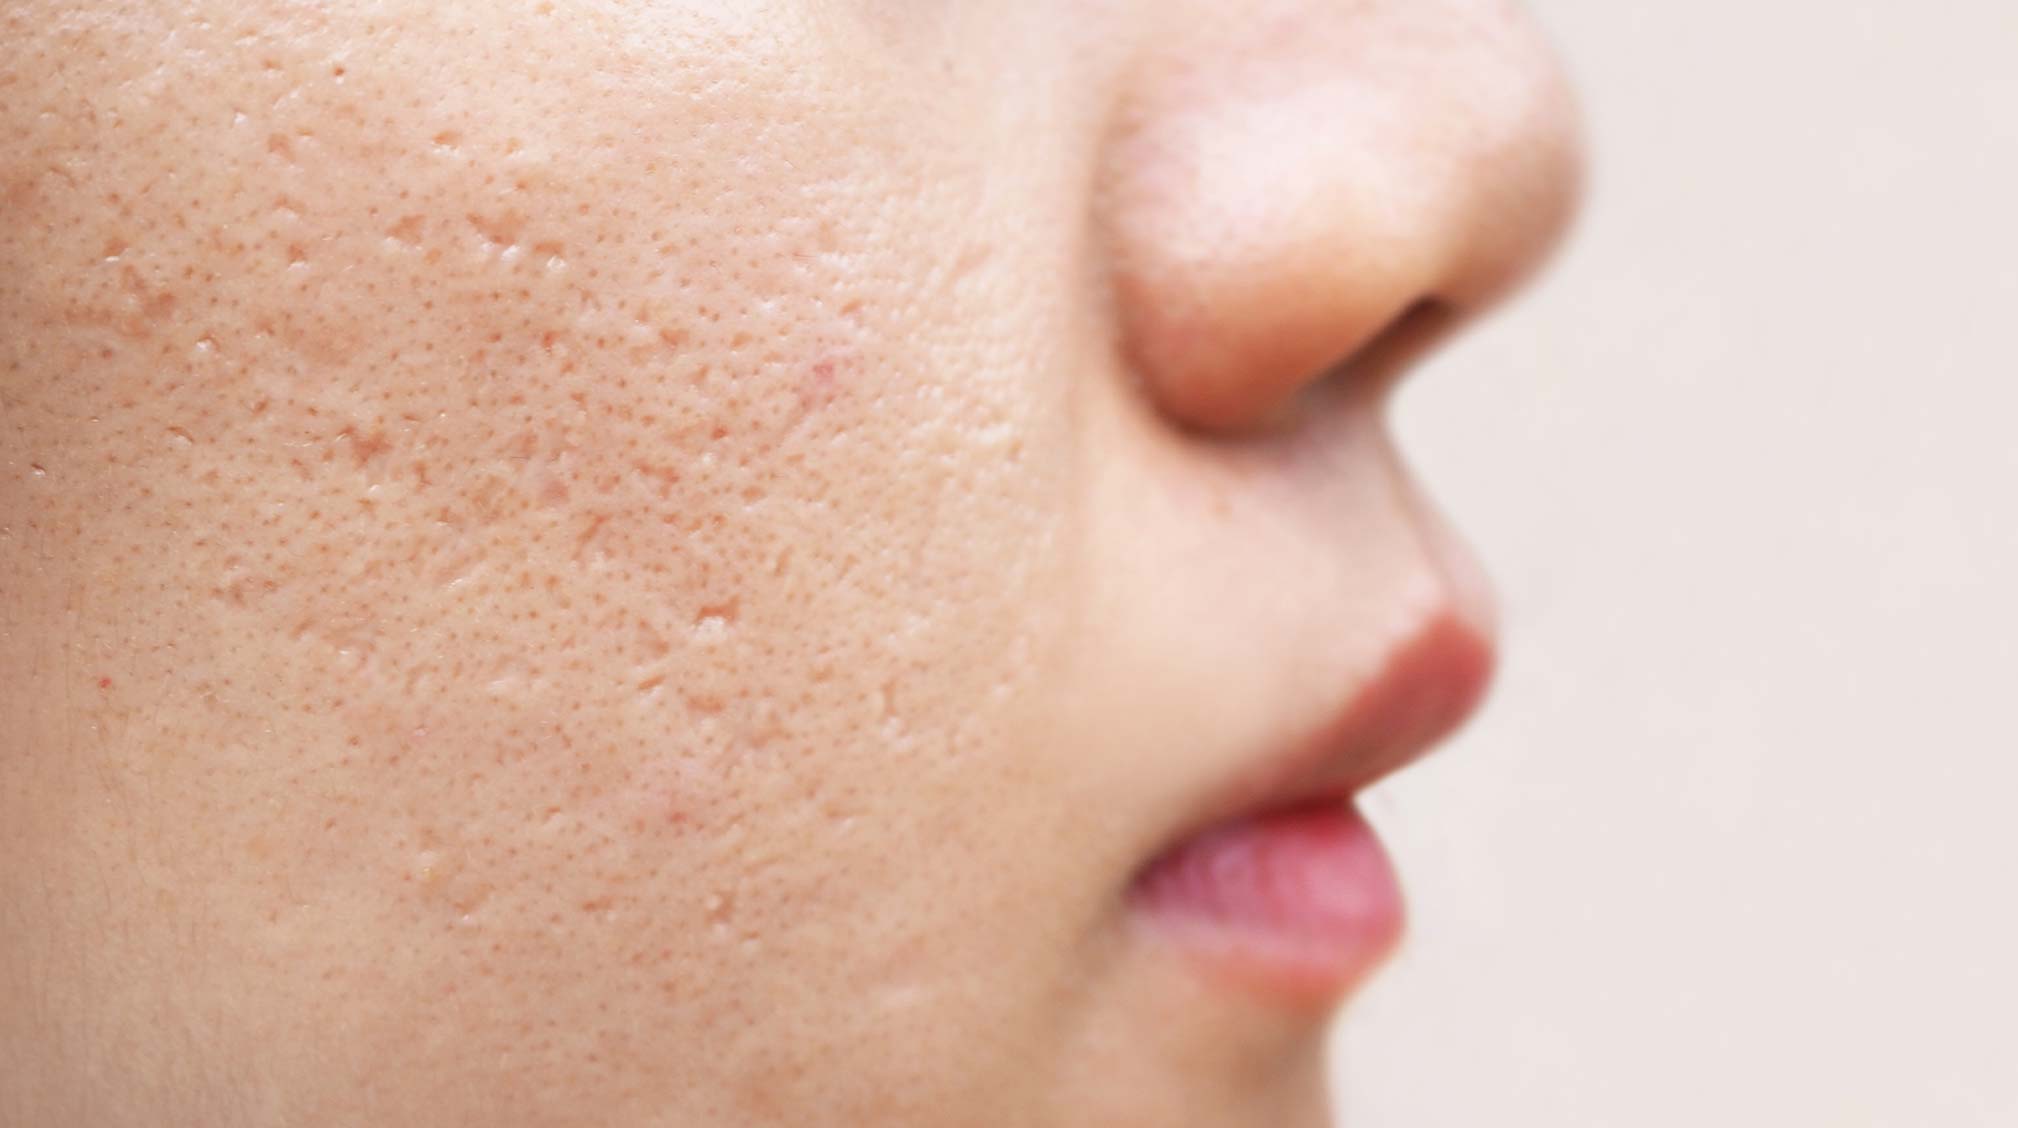 How to get rid of acne scars according to experts